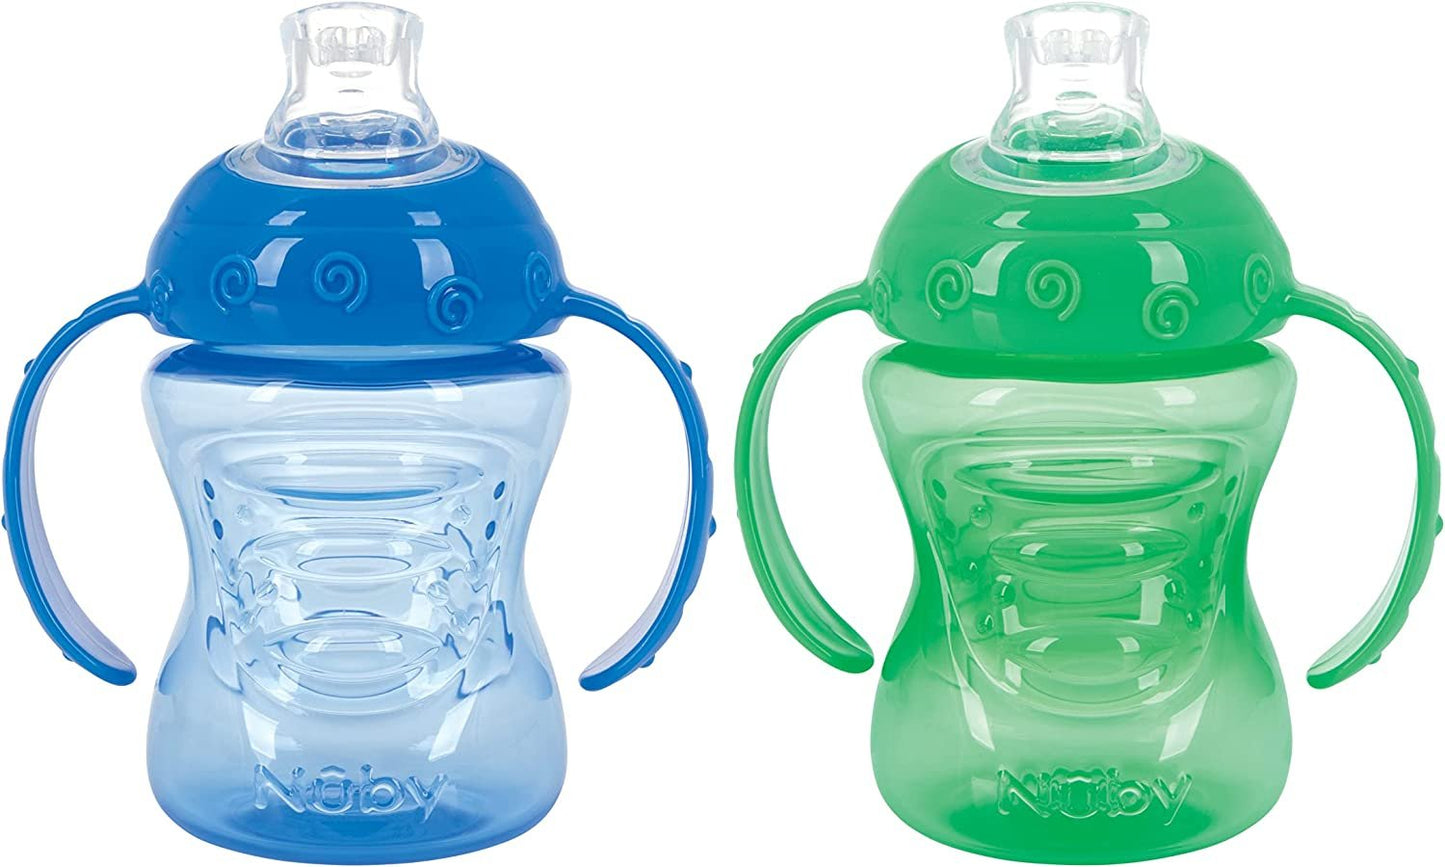 Nuby Two-Handle No-Spill Super Spout Grip N' Sip Cups, 8 Ounce (2 Count, Blue, Green)